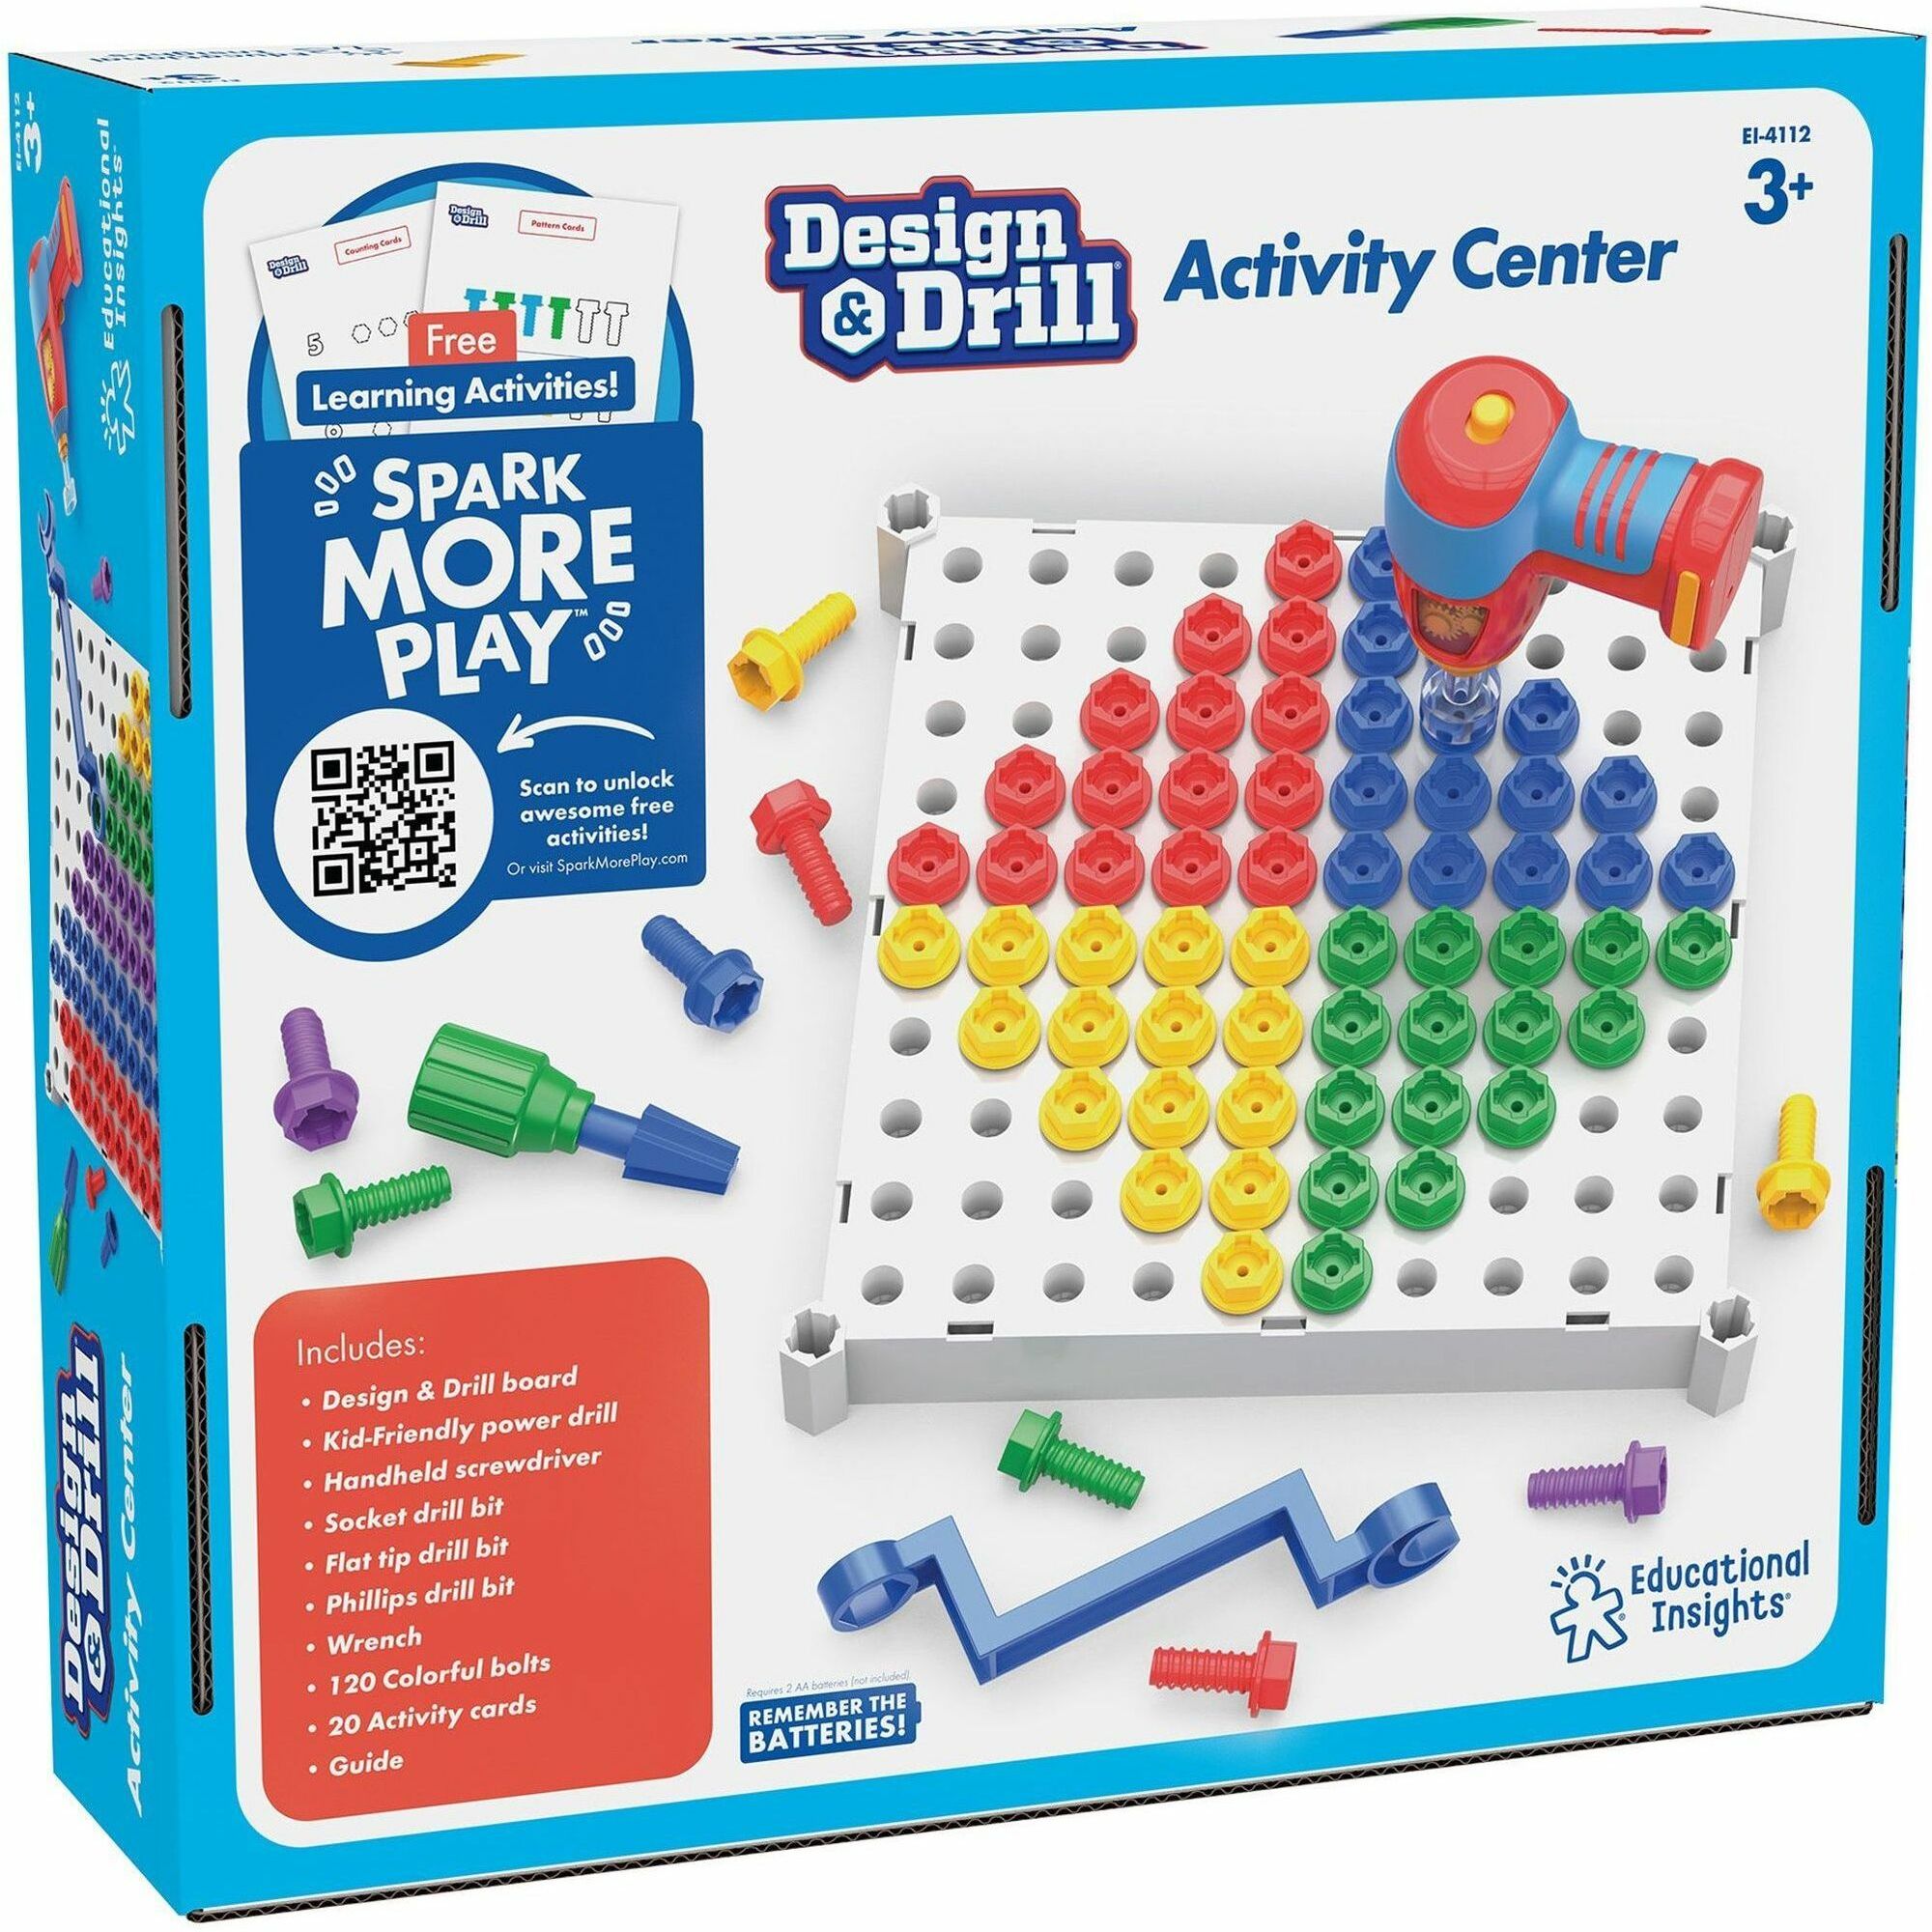 Educational Insights Design/Drill Activity Center - Theme/Subject: Learning - Skill Learning: Imagination, Creativity, Motor Skills, Color Matching, Skill Drill - 3-6 Year - 